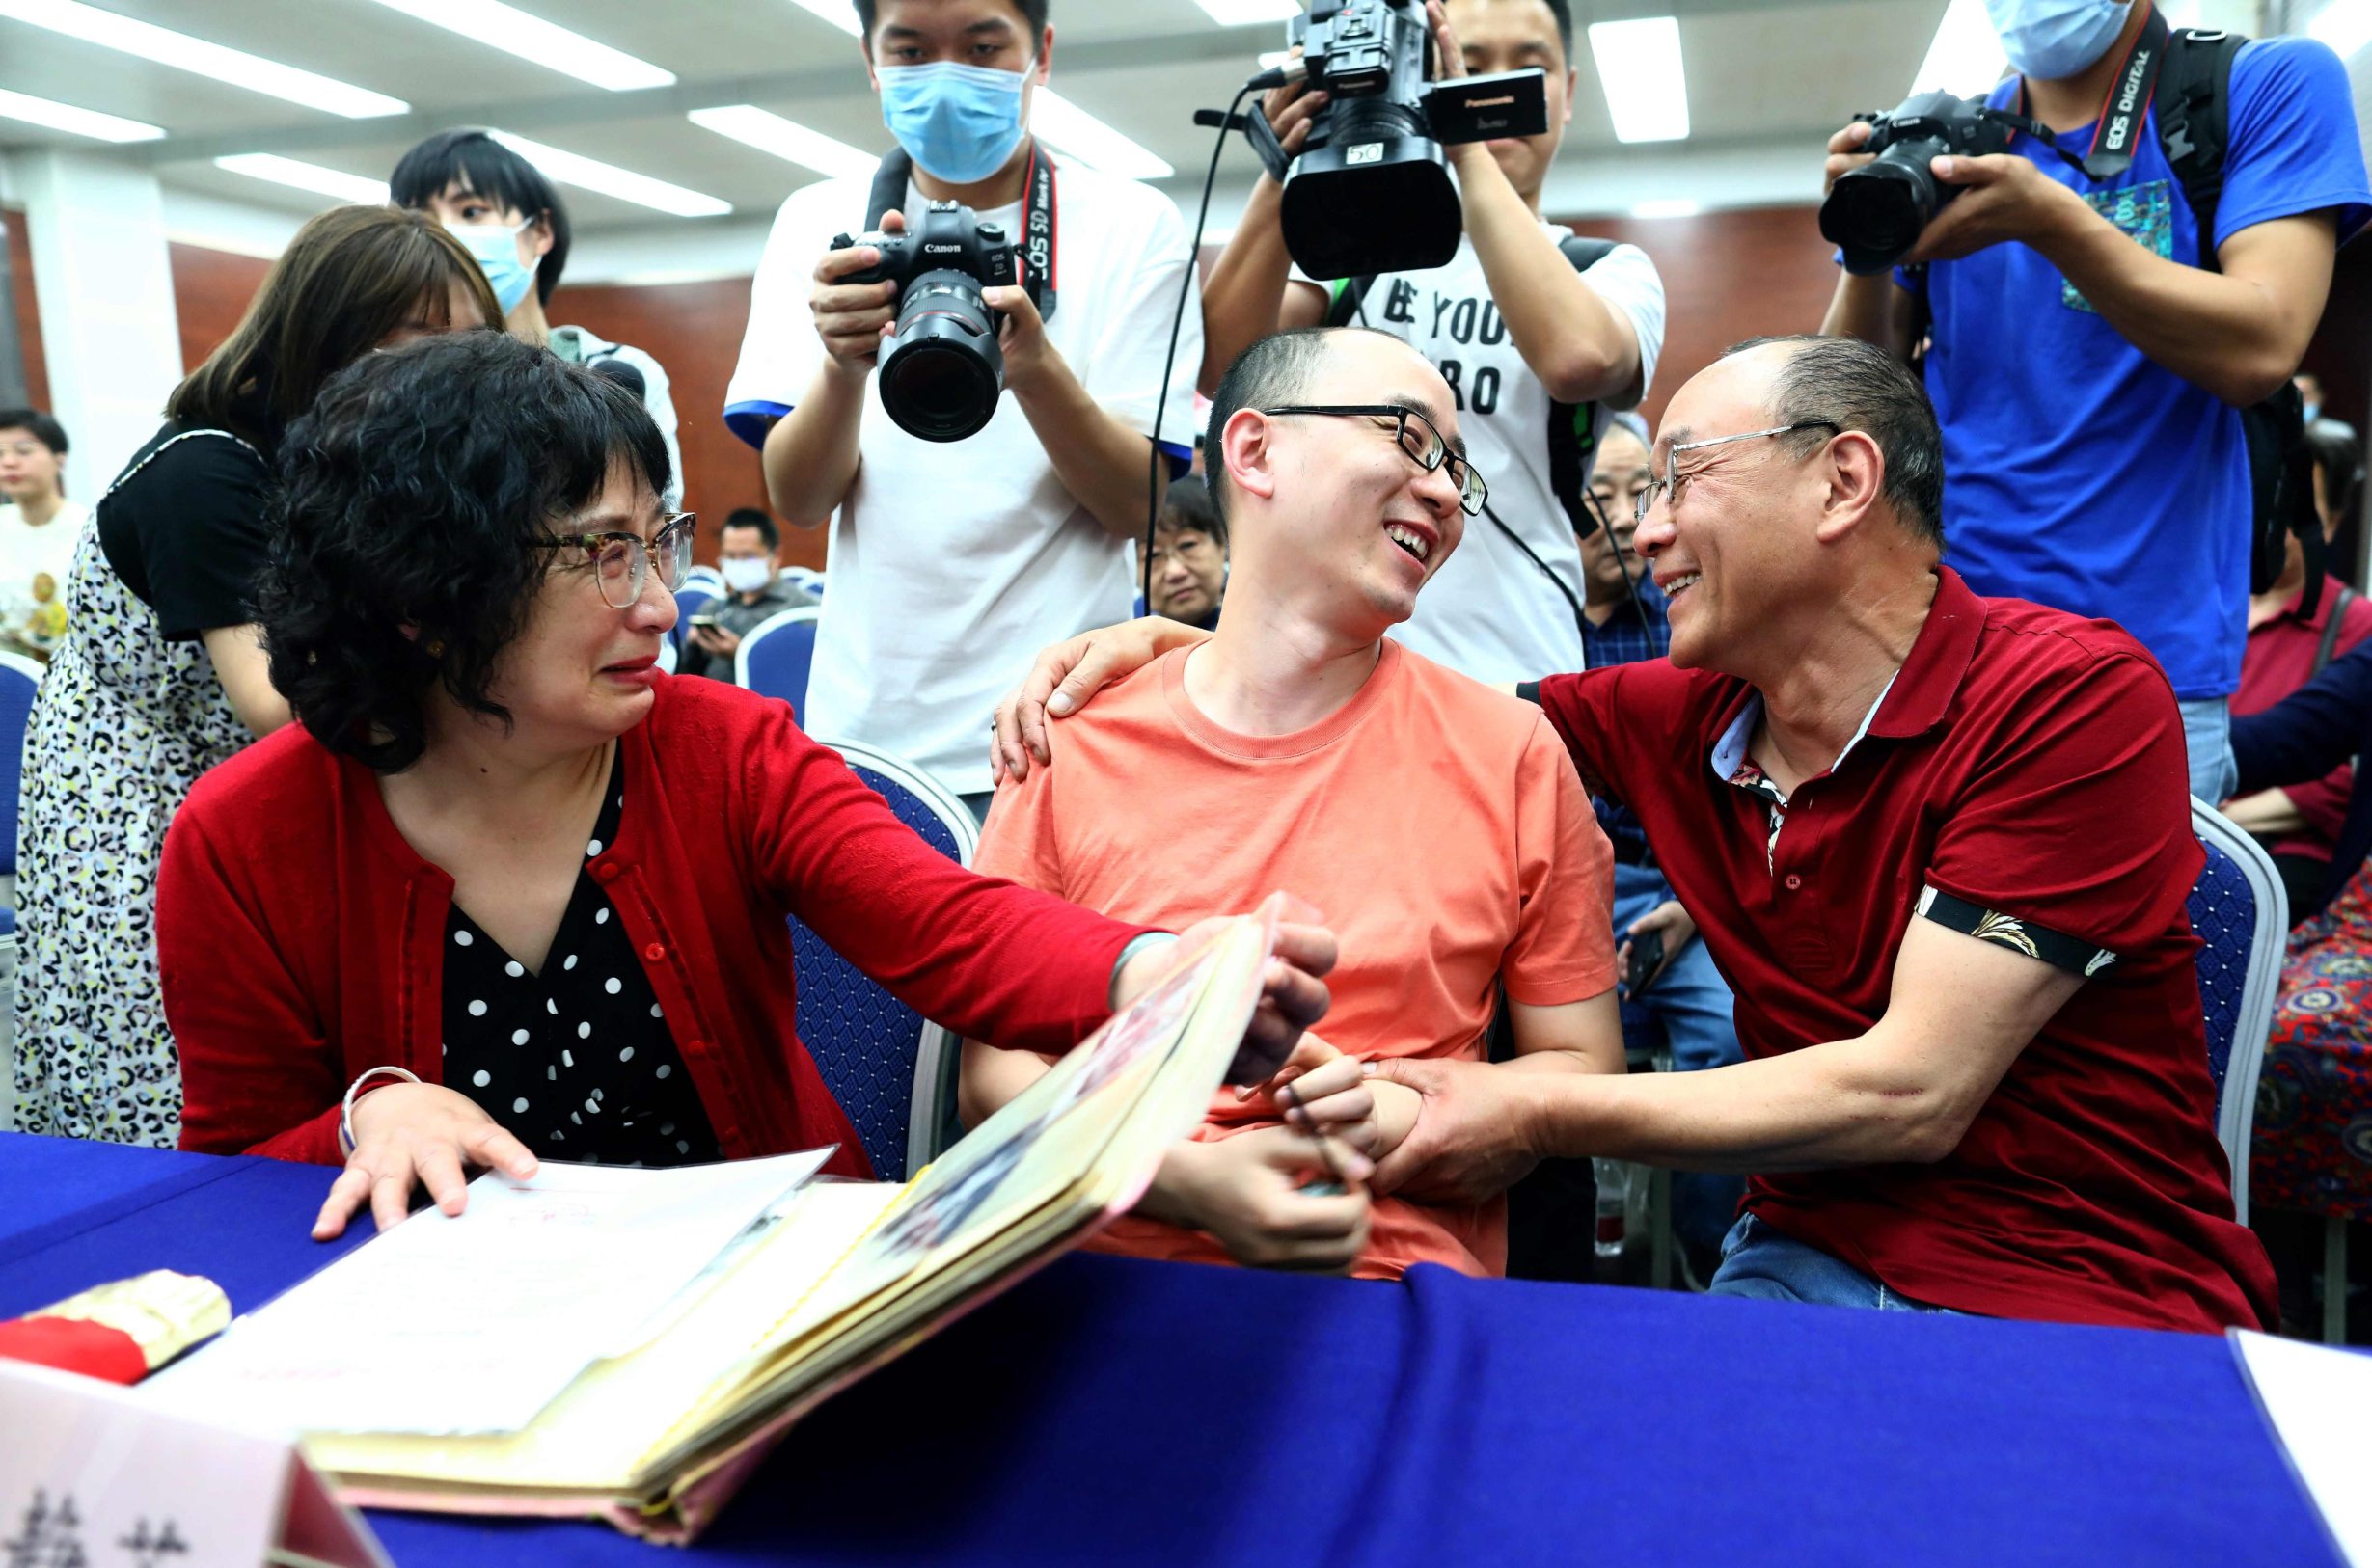 This photo taken on May 18, 2020 shows Mao Yin (C) speaking with his mother Li Jingzhi (L) and father Mao Zhenping (R) in Xian, in China's northern Shaanxi province. - A Chinese man who was kidnapped as a toddler 32 years ago has been reunited with his biological parents, after police used facial recognition technology to track him down. (Photo by STR / AFP) / China OUT